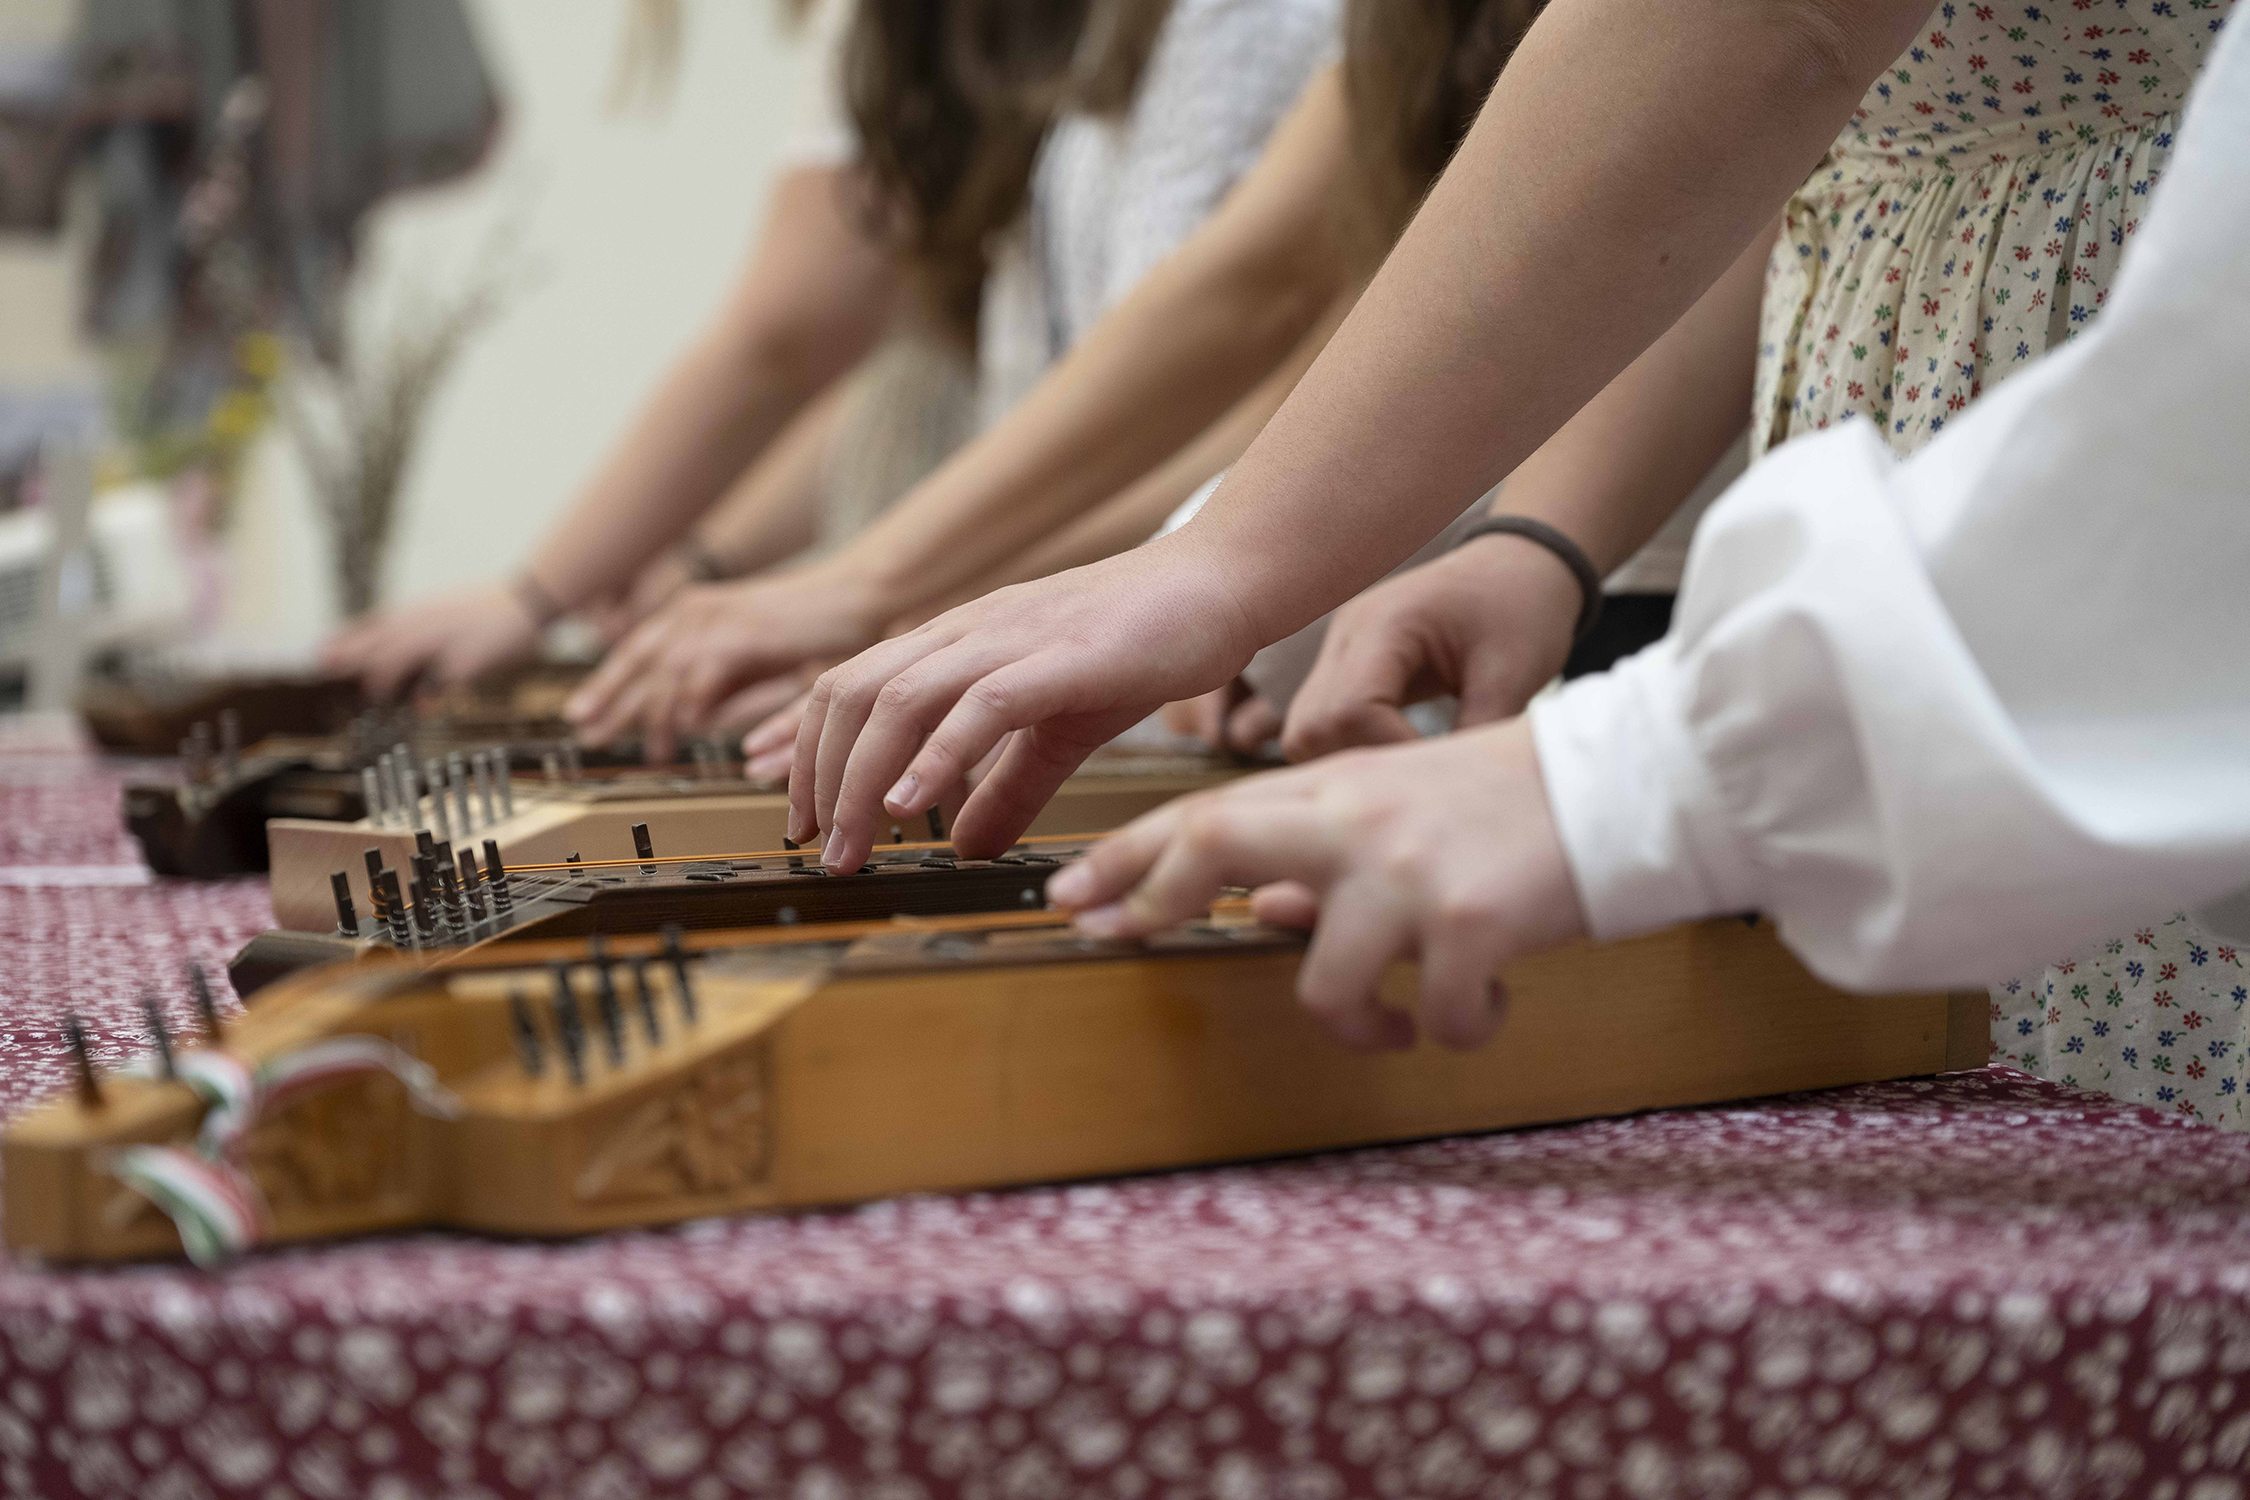 zither players